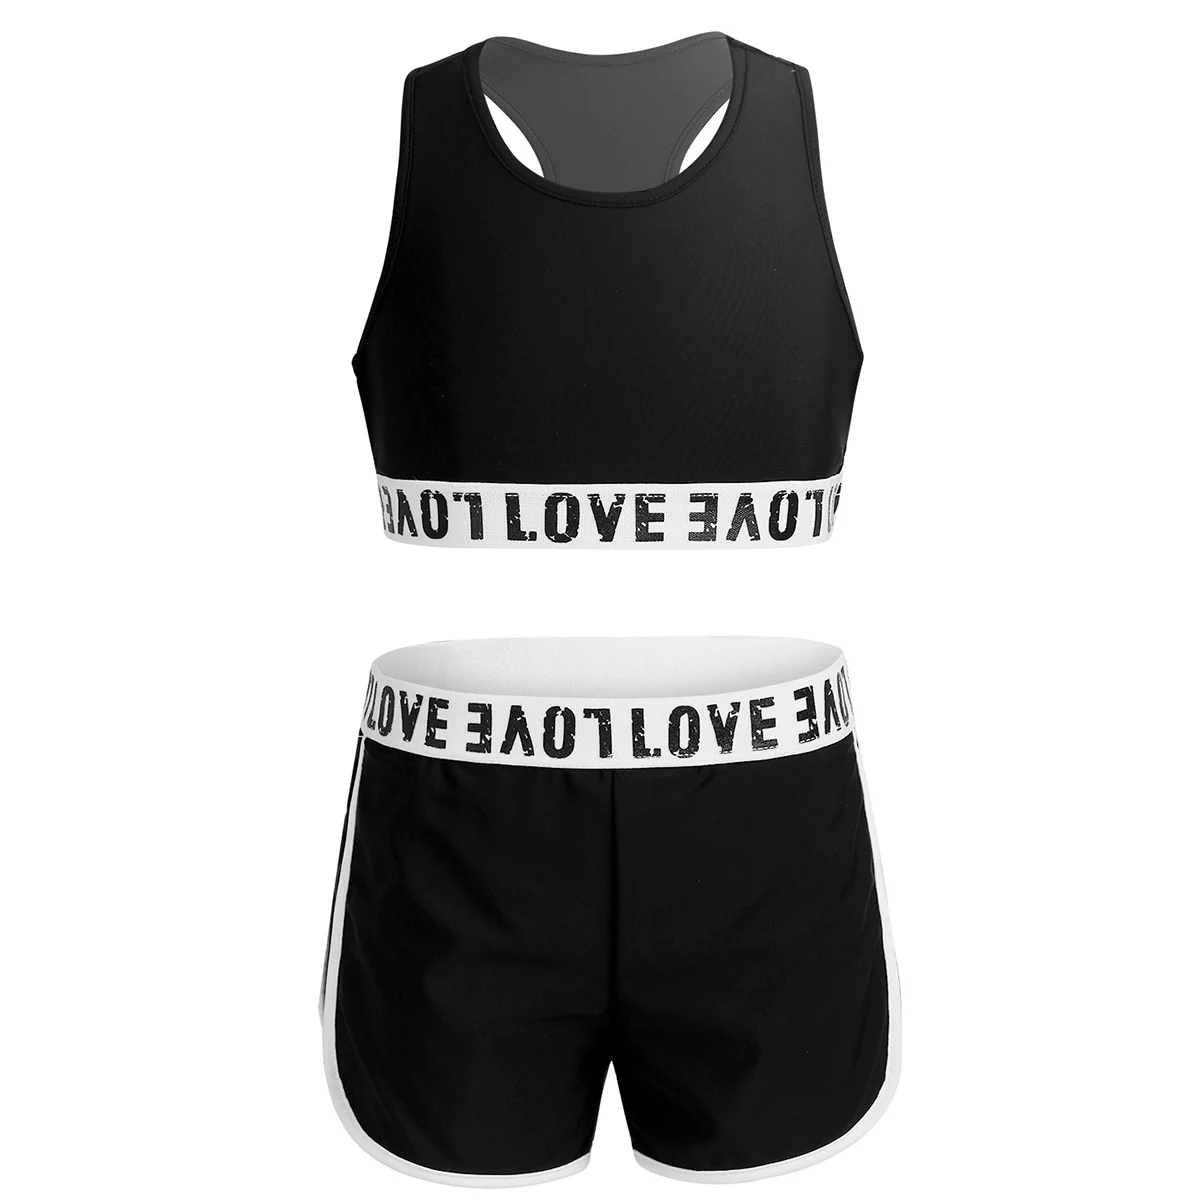 

Kids Girls Two-piece Dancewear Letter Printed Sleeveless Racerback Crop Top Shorts Set Ballet Gymnastics Workout Athletic Outfit